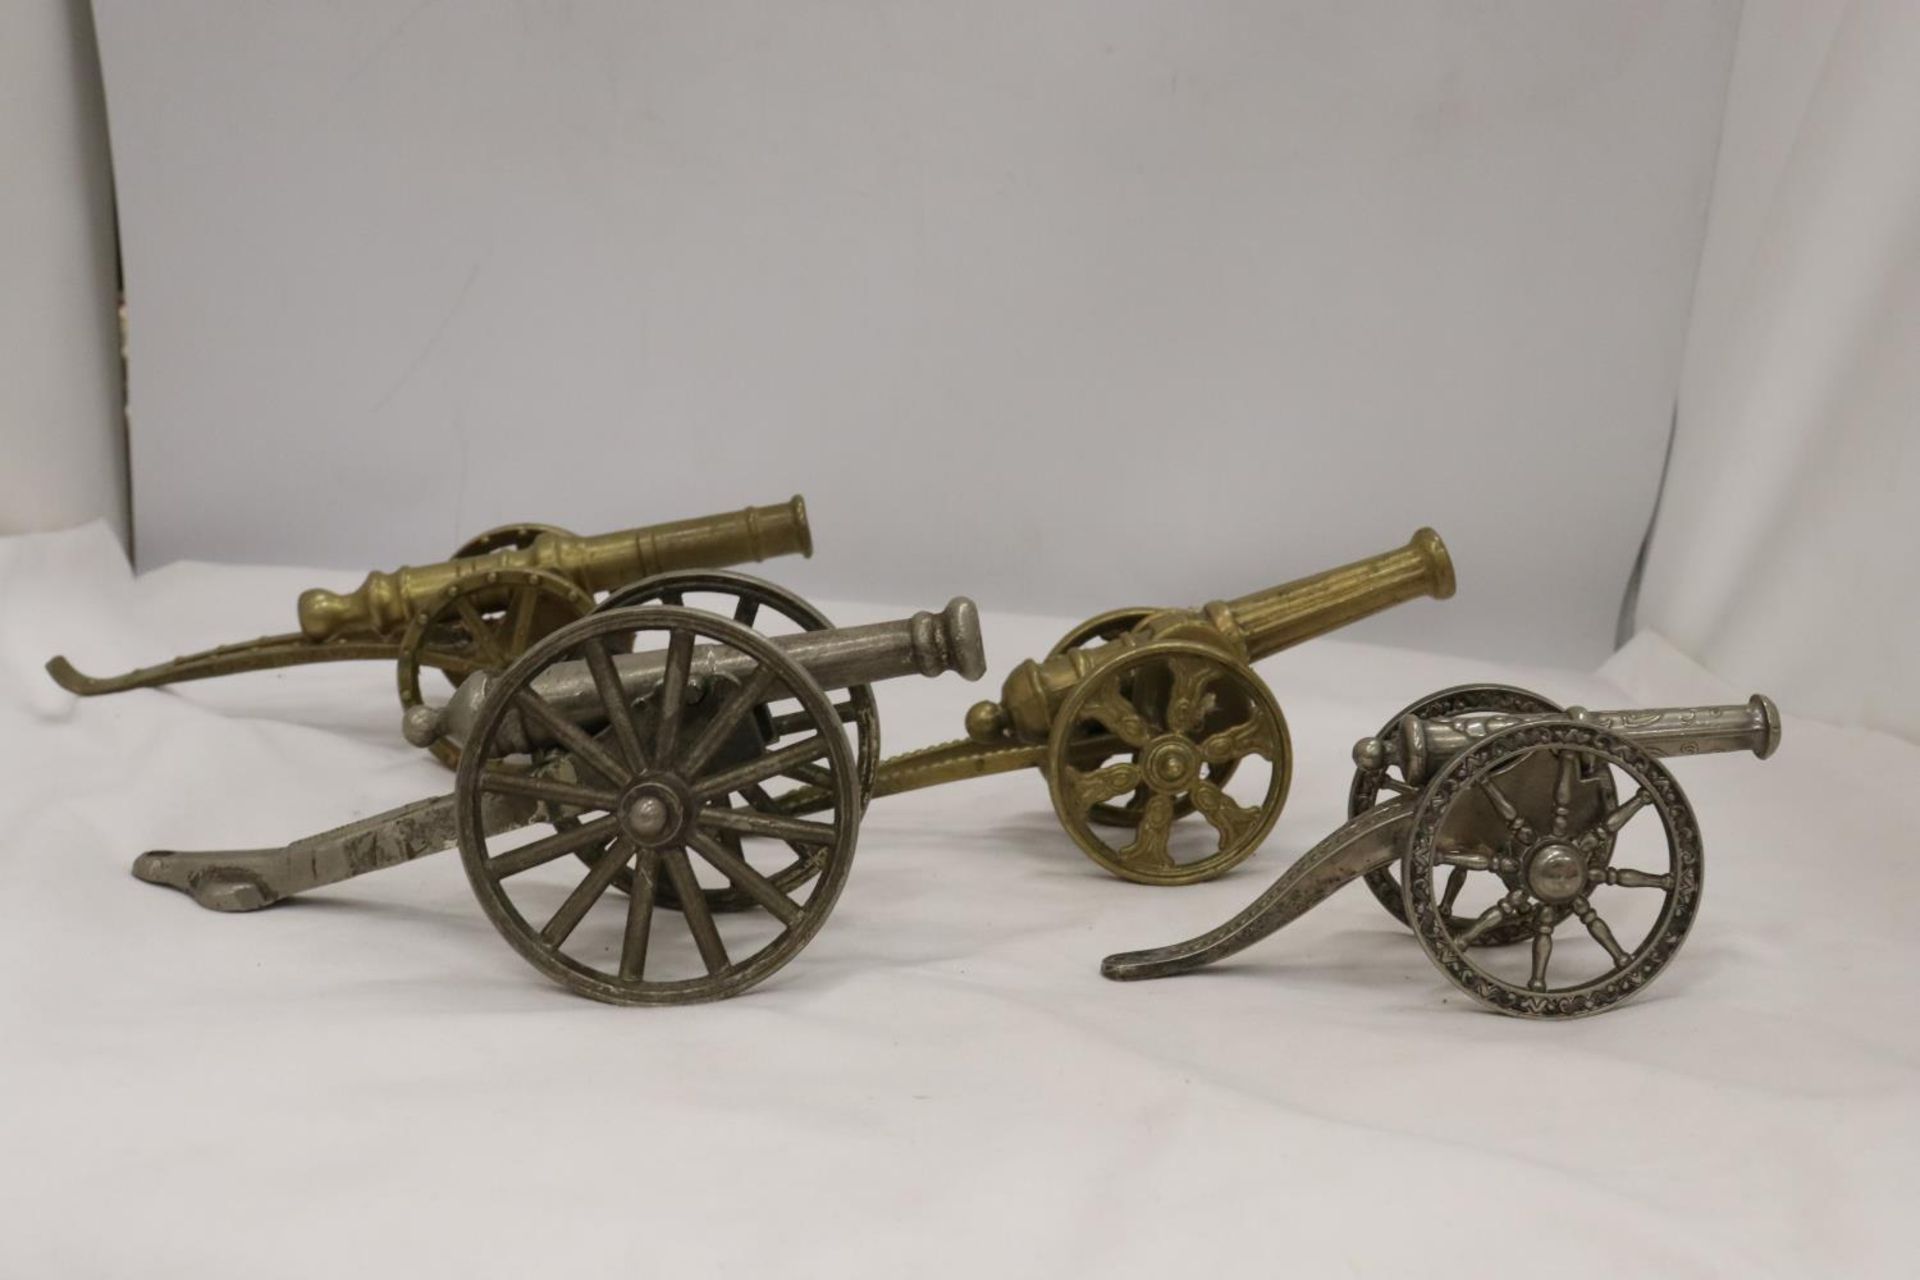 FOUR MODEL CANONS, TWO BRASS AND TWO WHITE METAL - Image 3 of 3